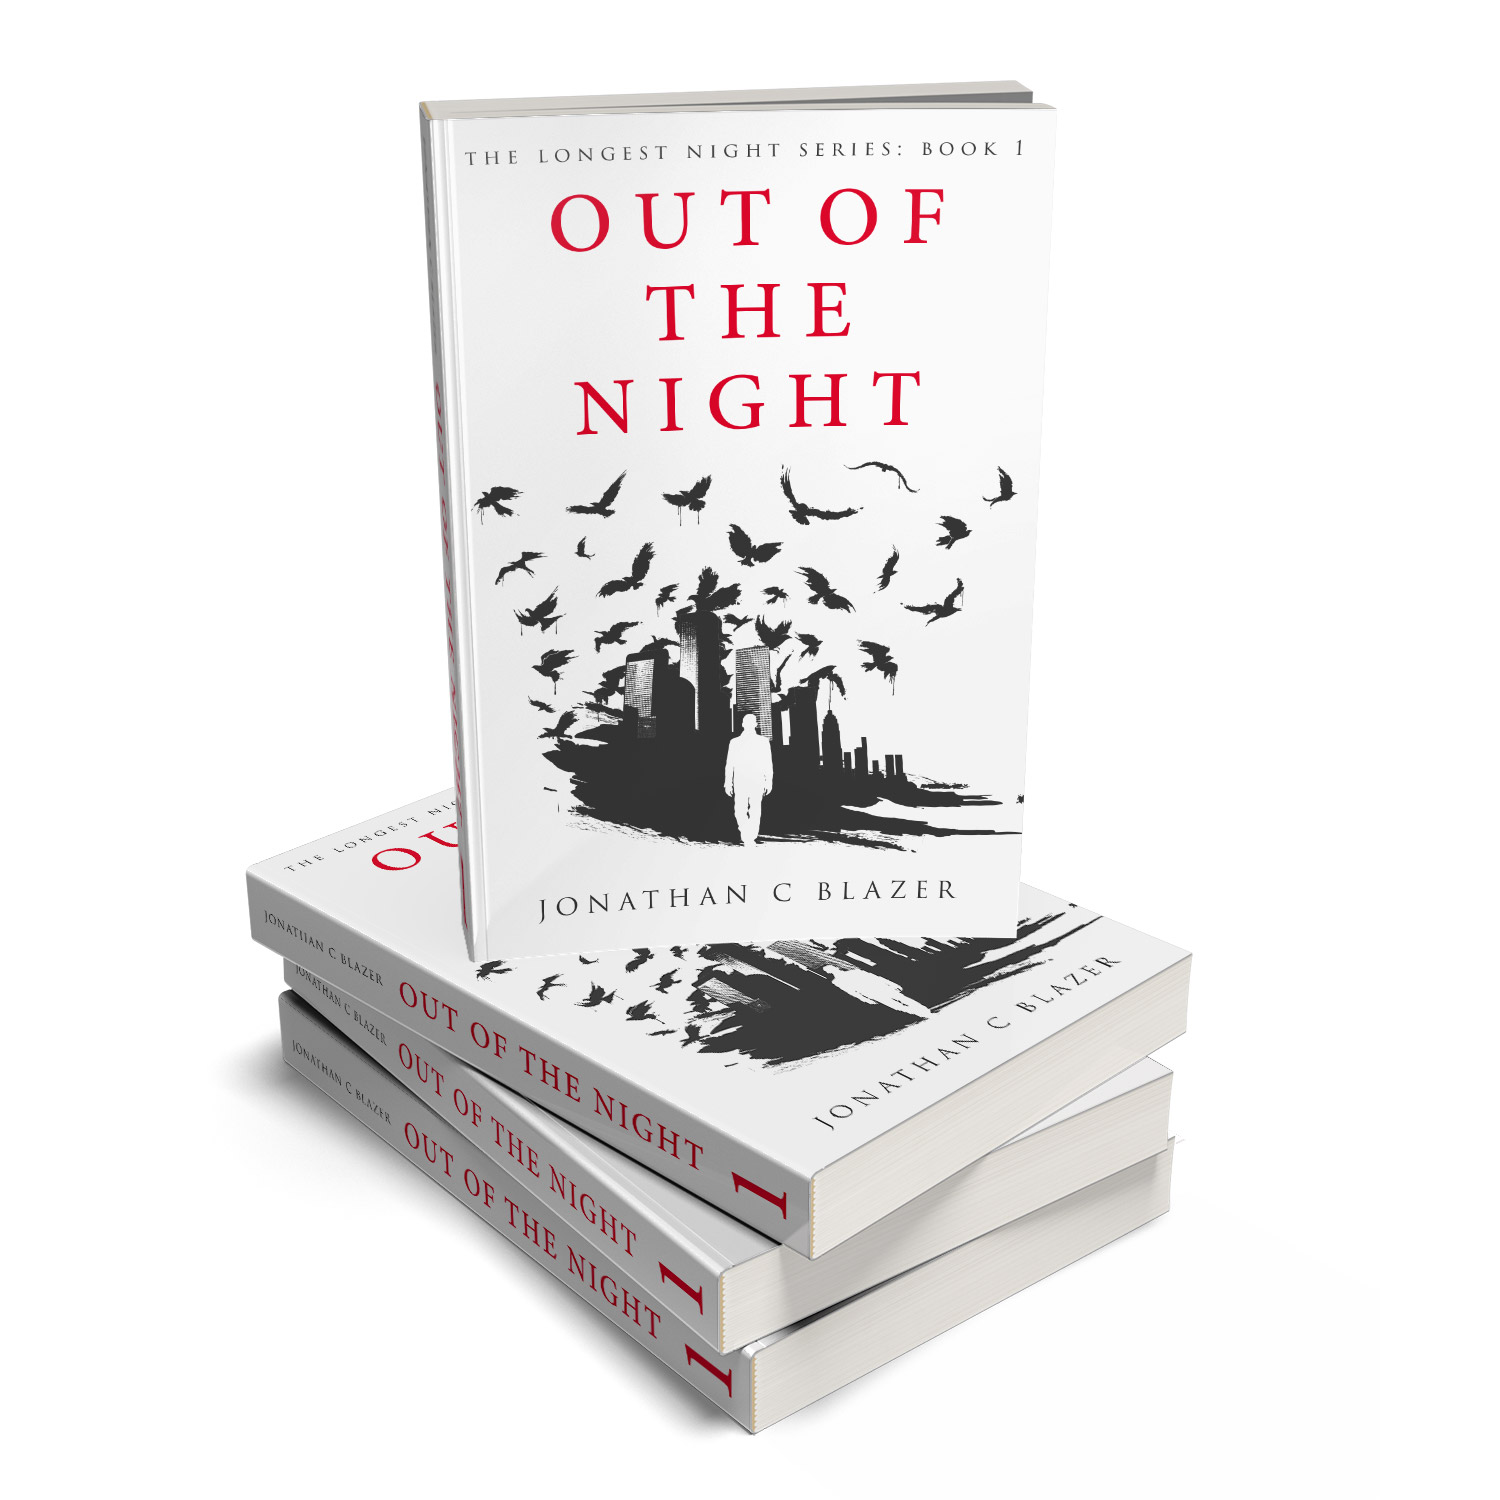 'Out Of The Night' is a highly evocative, wistful ghost story. The author is Jonathan C Blazer. The book cover was designed by Mark Thomas, of coverness.com. To find out more about my book design services, please visit www.coverness.com.